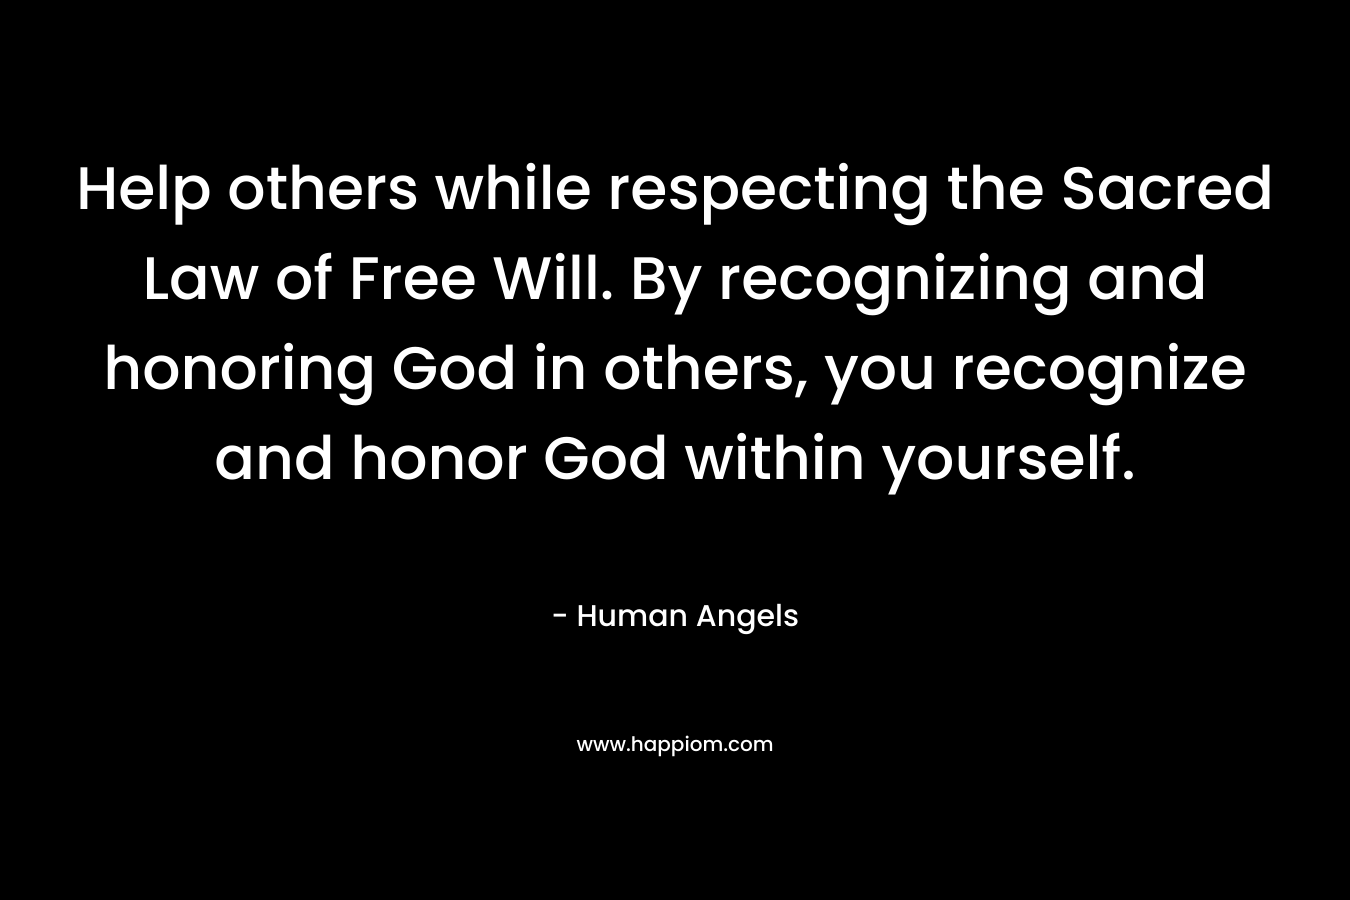 Help others while respecting the Sacred Law of Free Will. By recognizing and honoring God in others, you recognize and honor God within yourself. – Human Angels